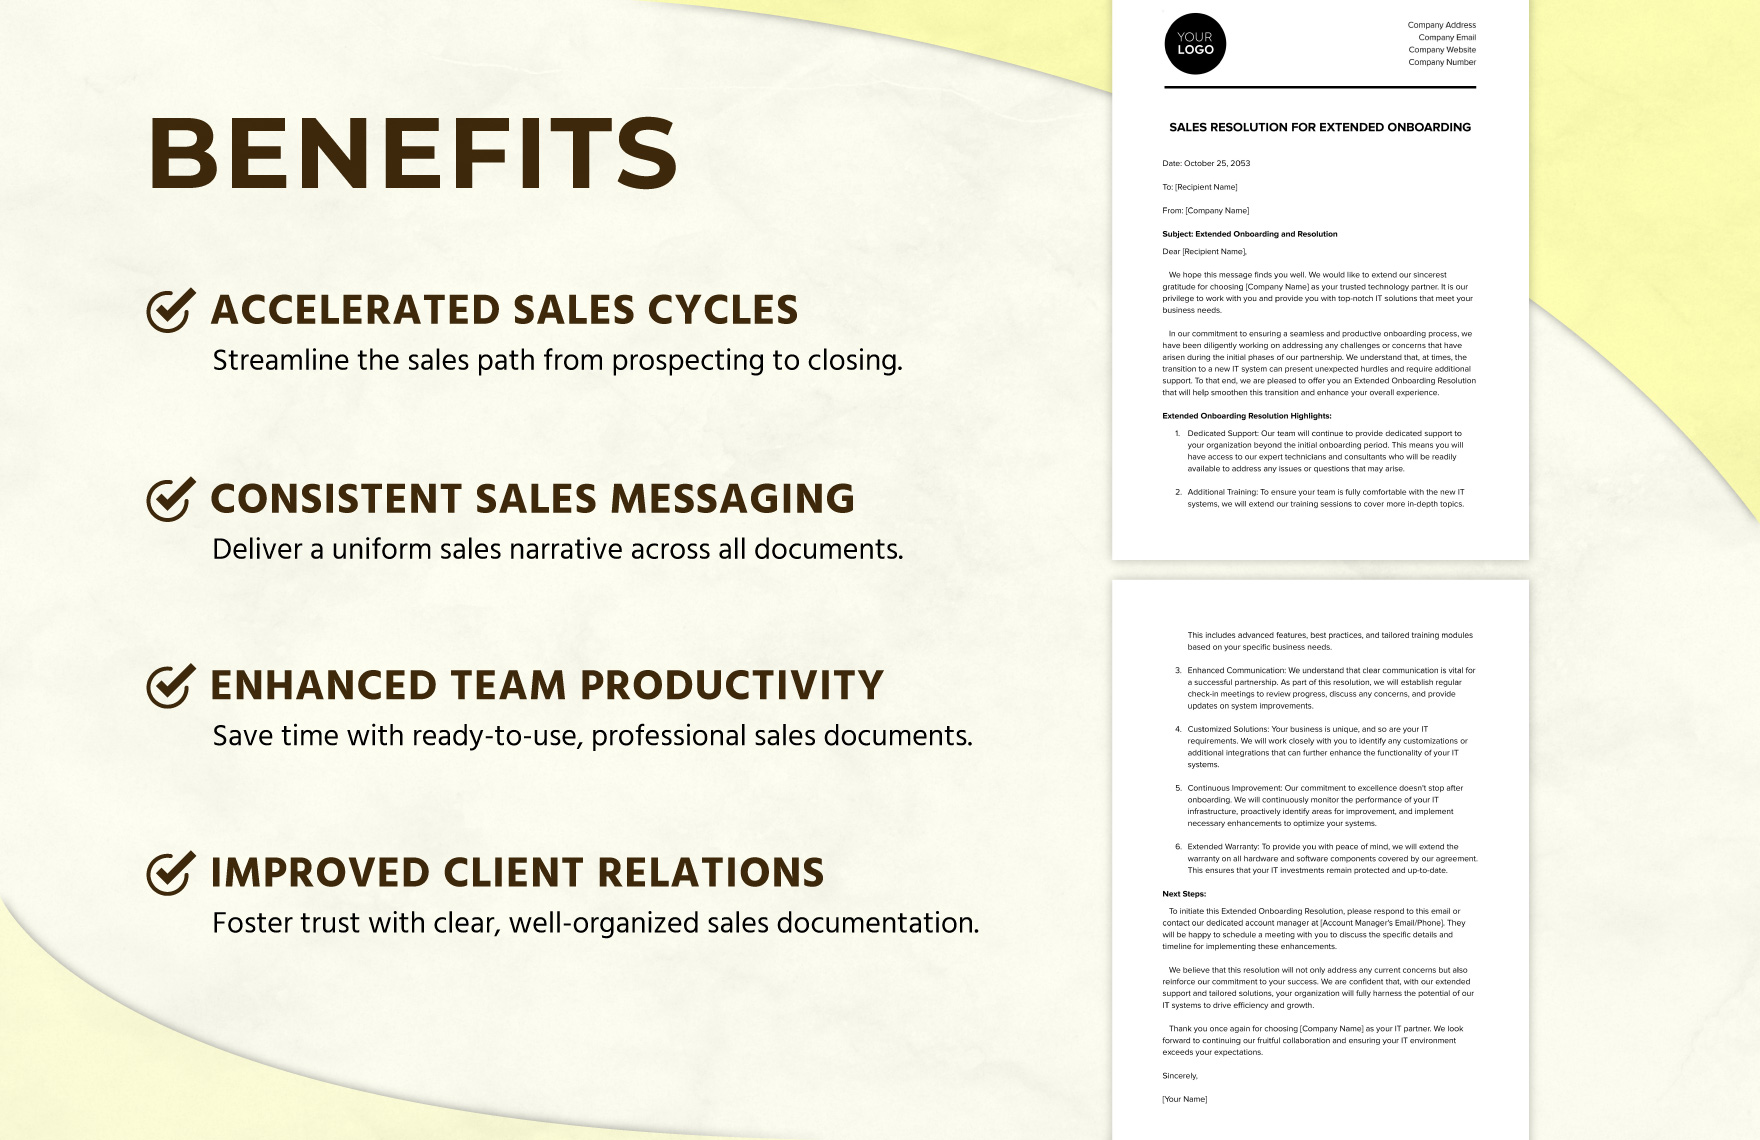 Sales Resolution for Extended Onboarding Template